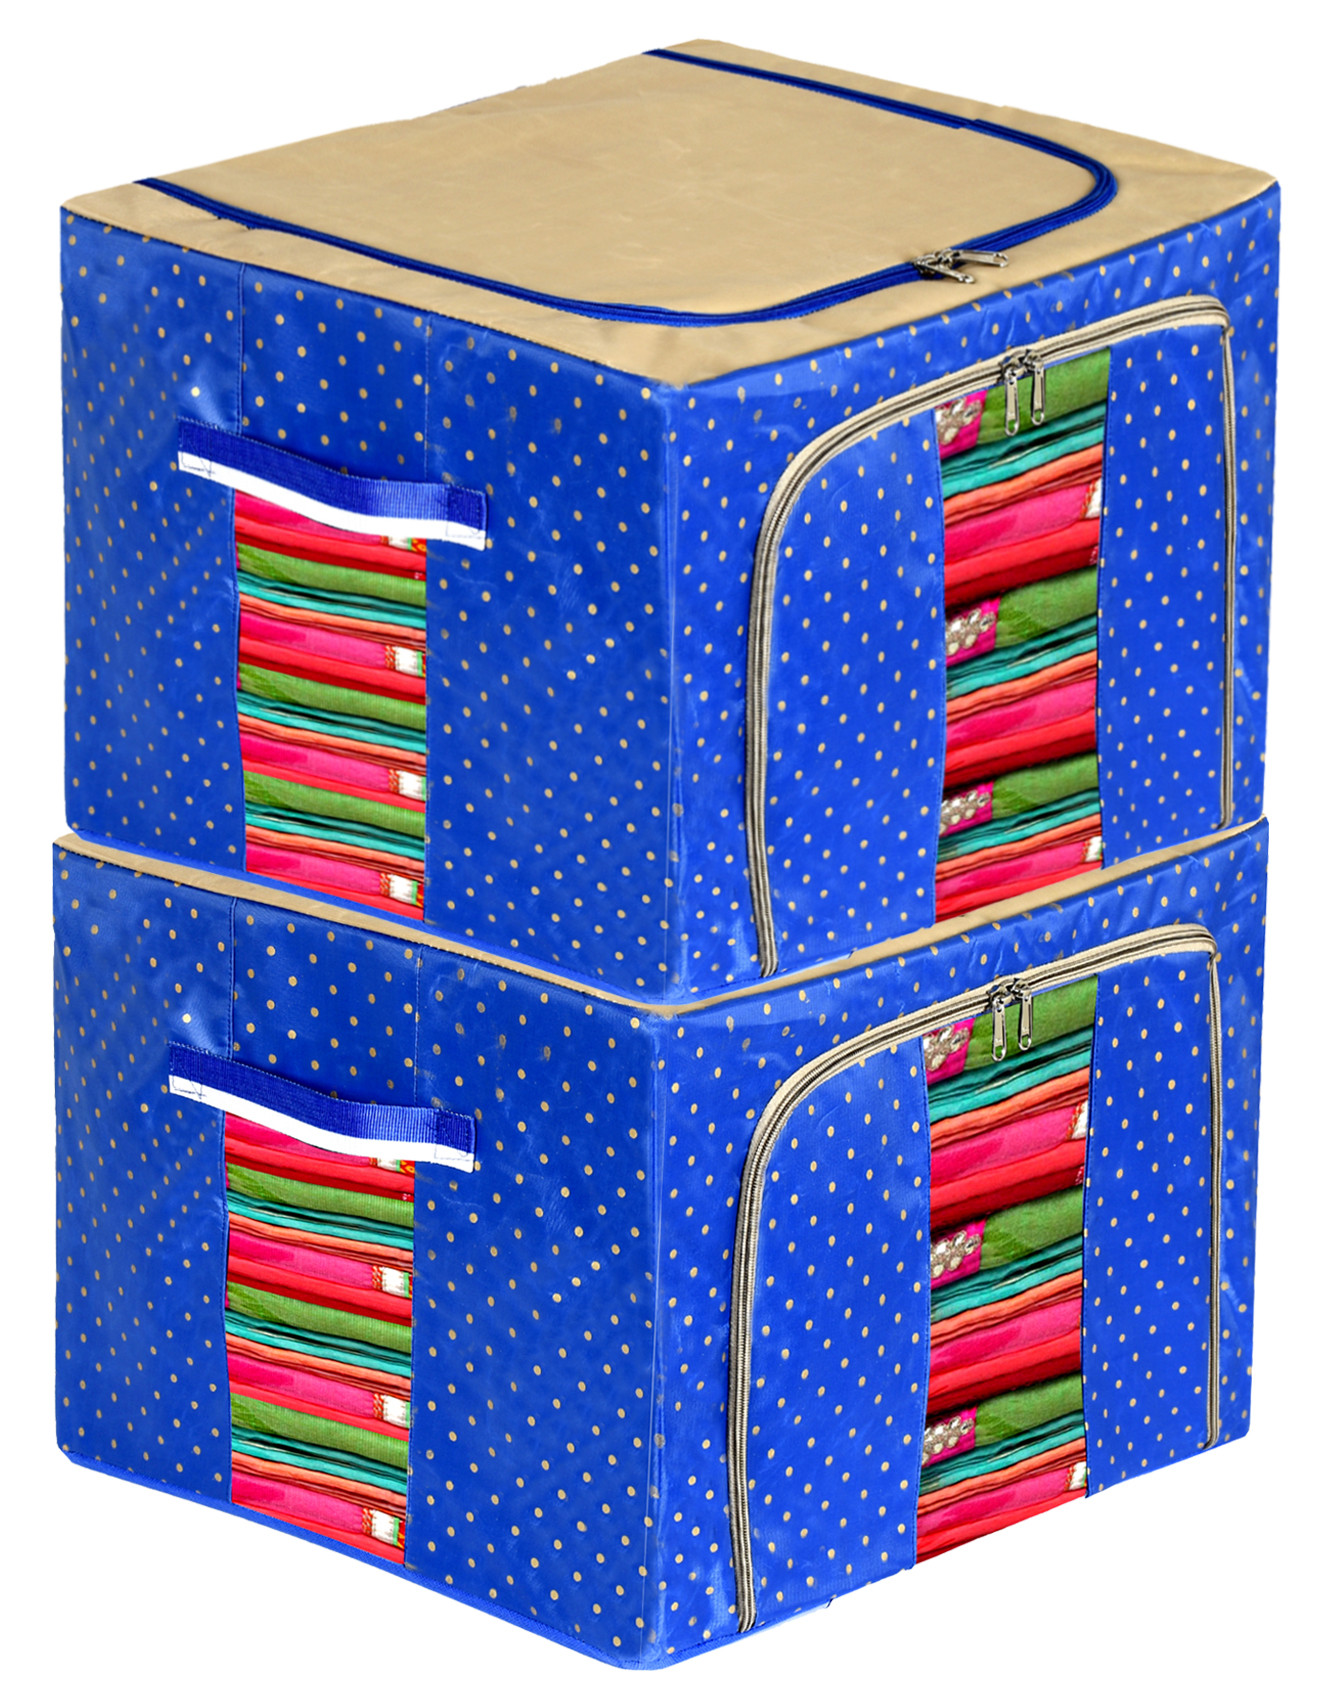 Kuber Industries Dot Printed Steel Frame Storage Box/Organizer For Clothing, Blankets, Bedding With Clear Window, 44Ltr. (Blue & Brown)-44KM0233